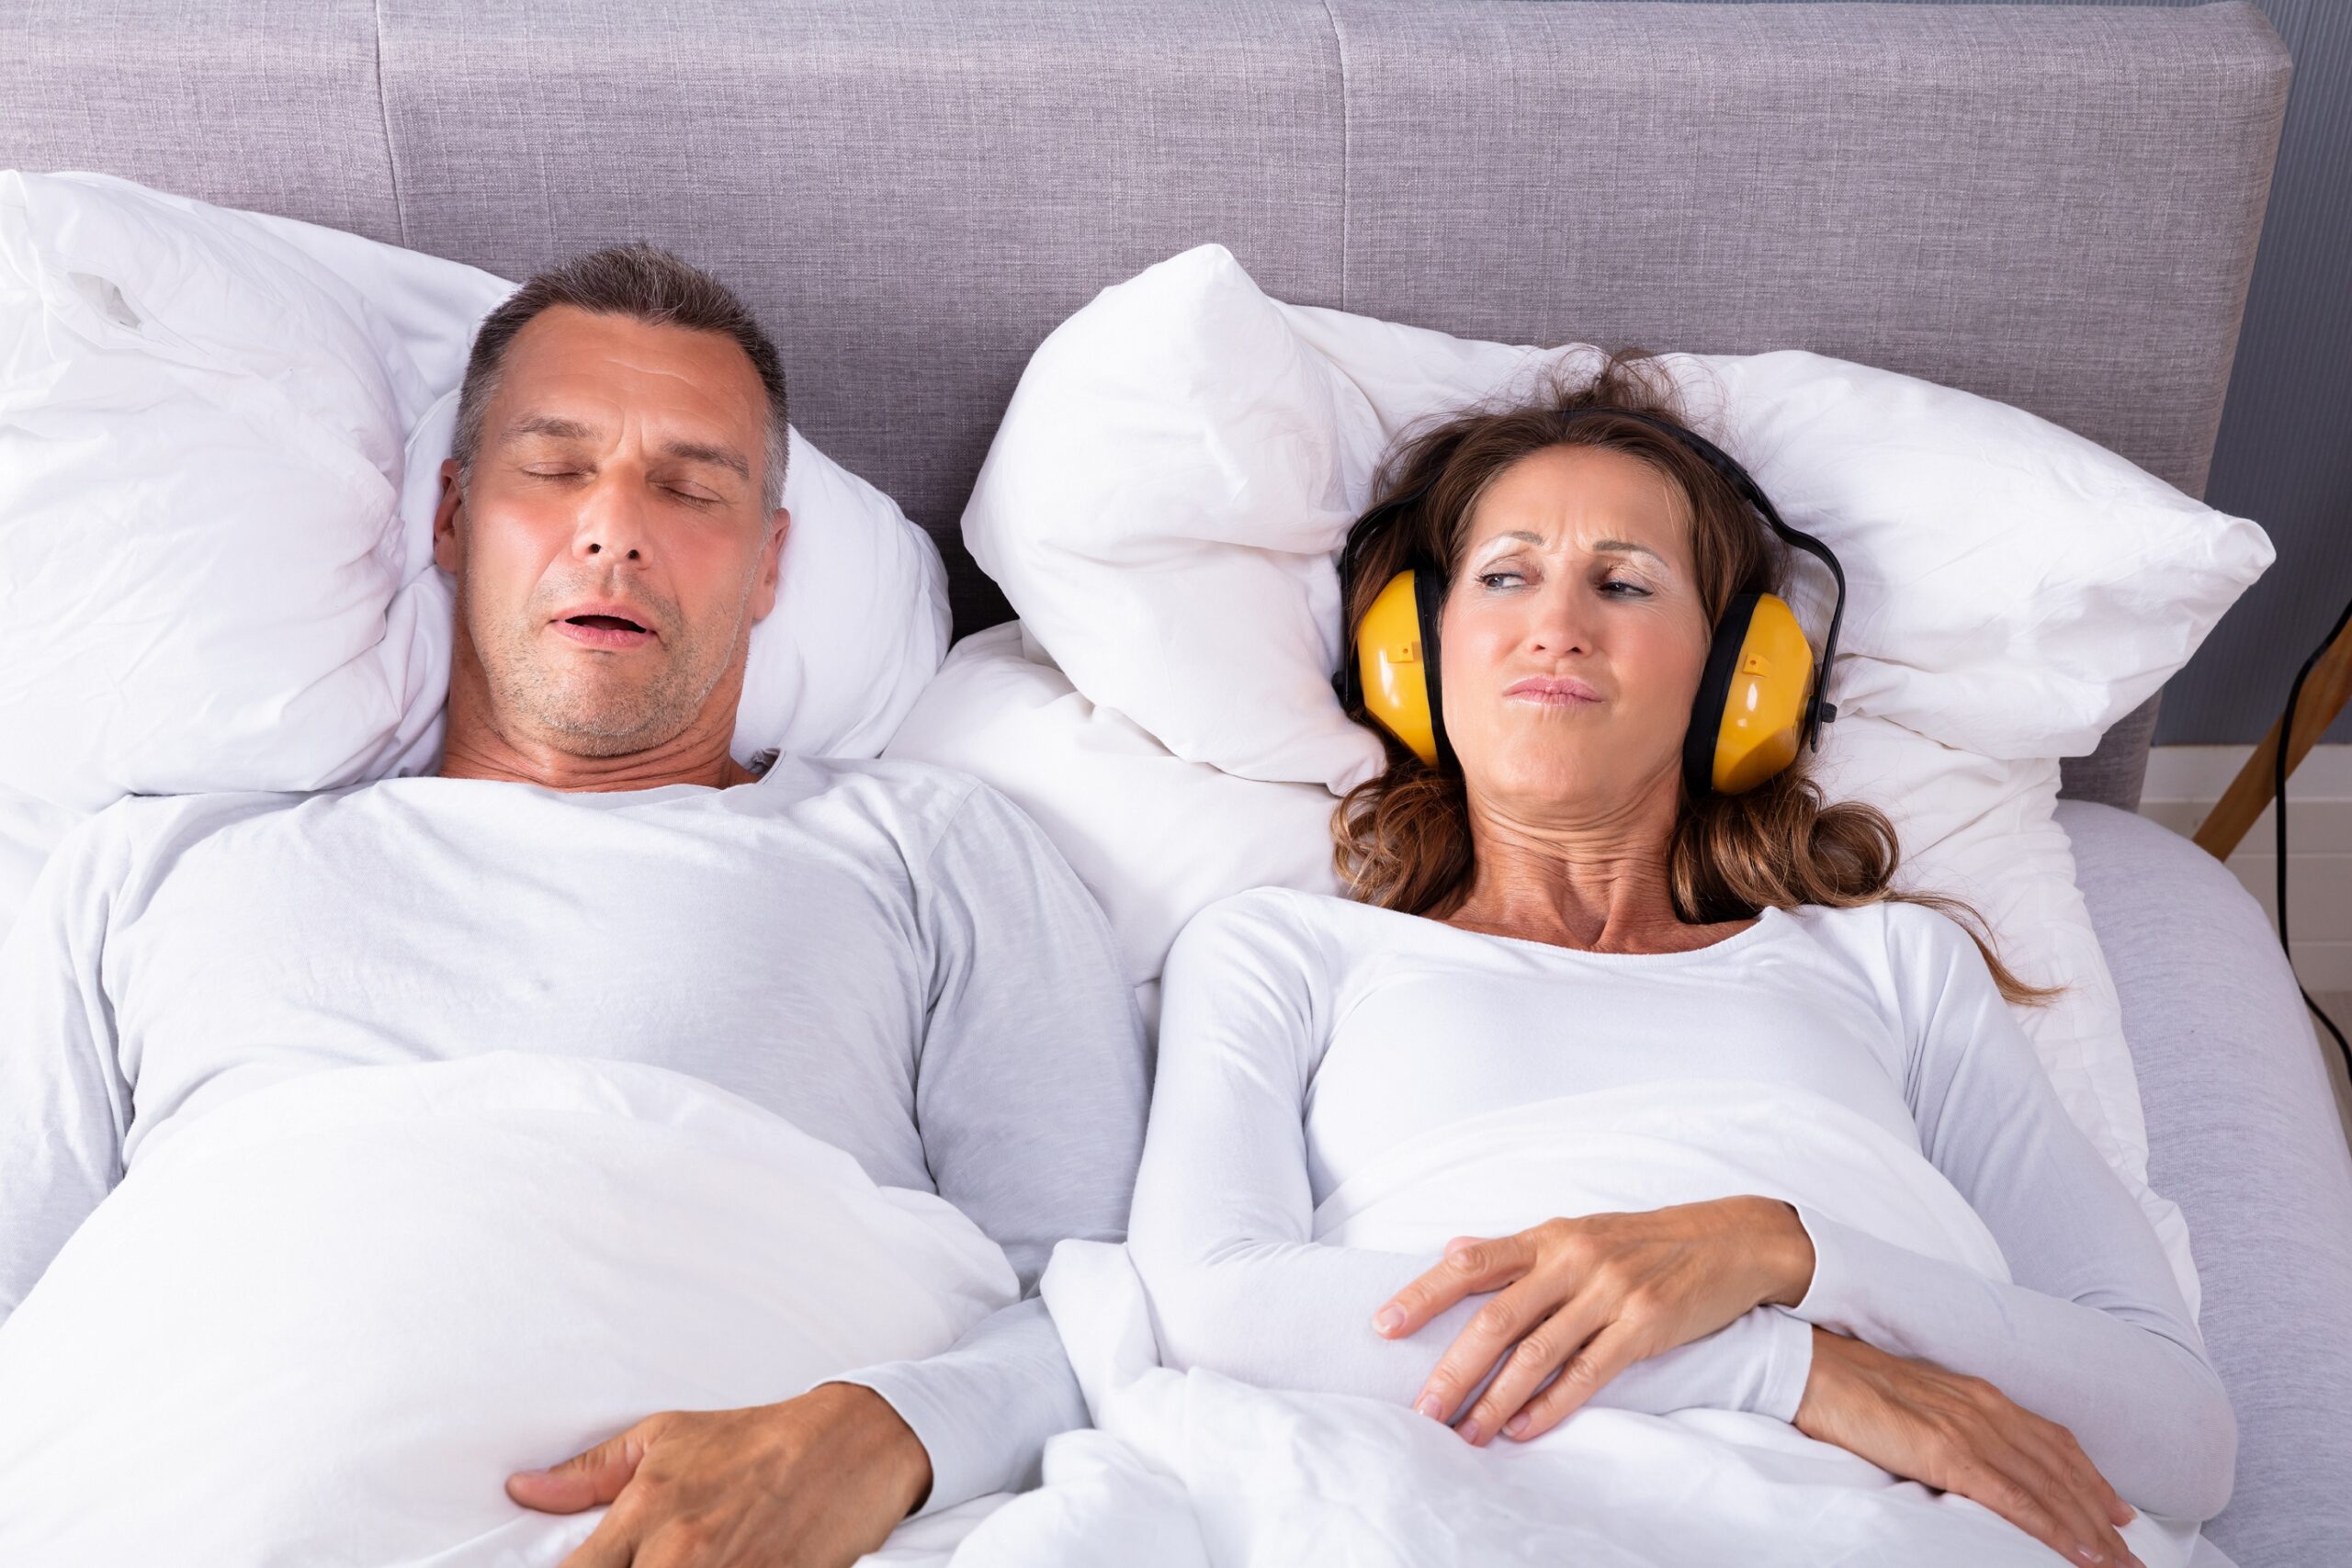 Five tips against snoring